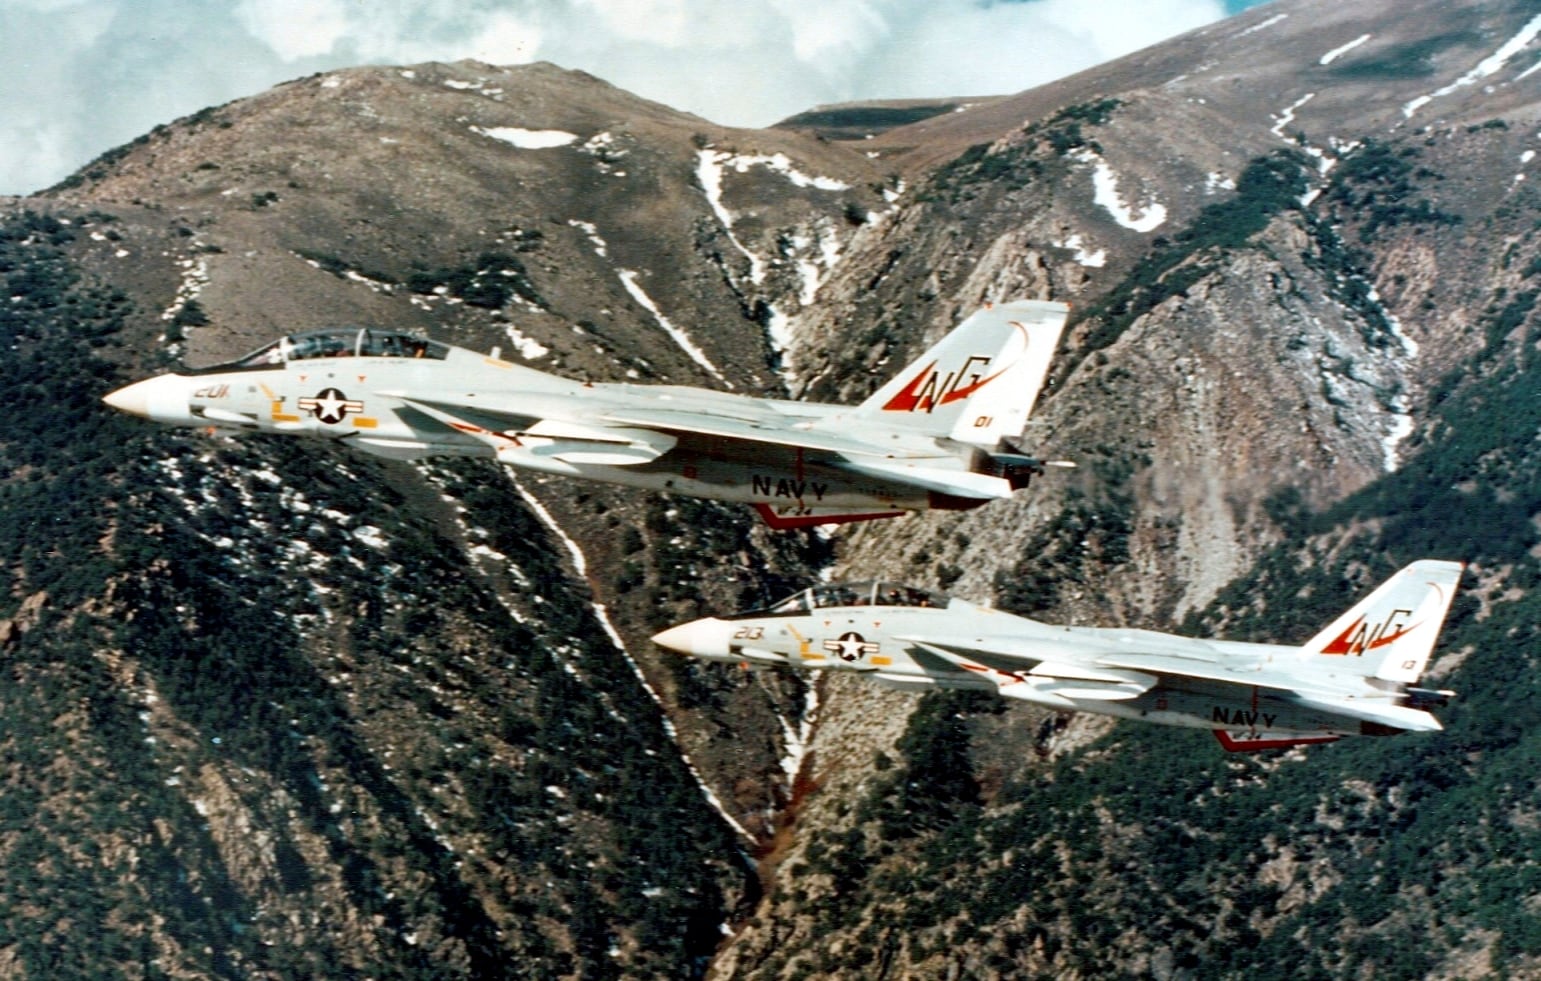 Two of the F-14 Tomcat aircraft in flight.